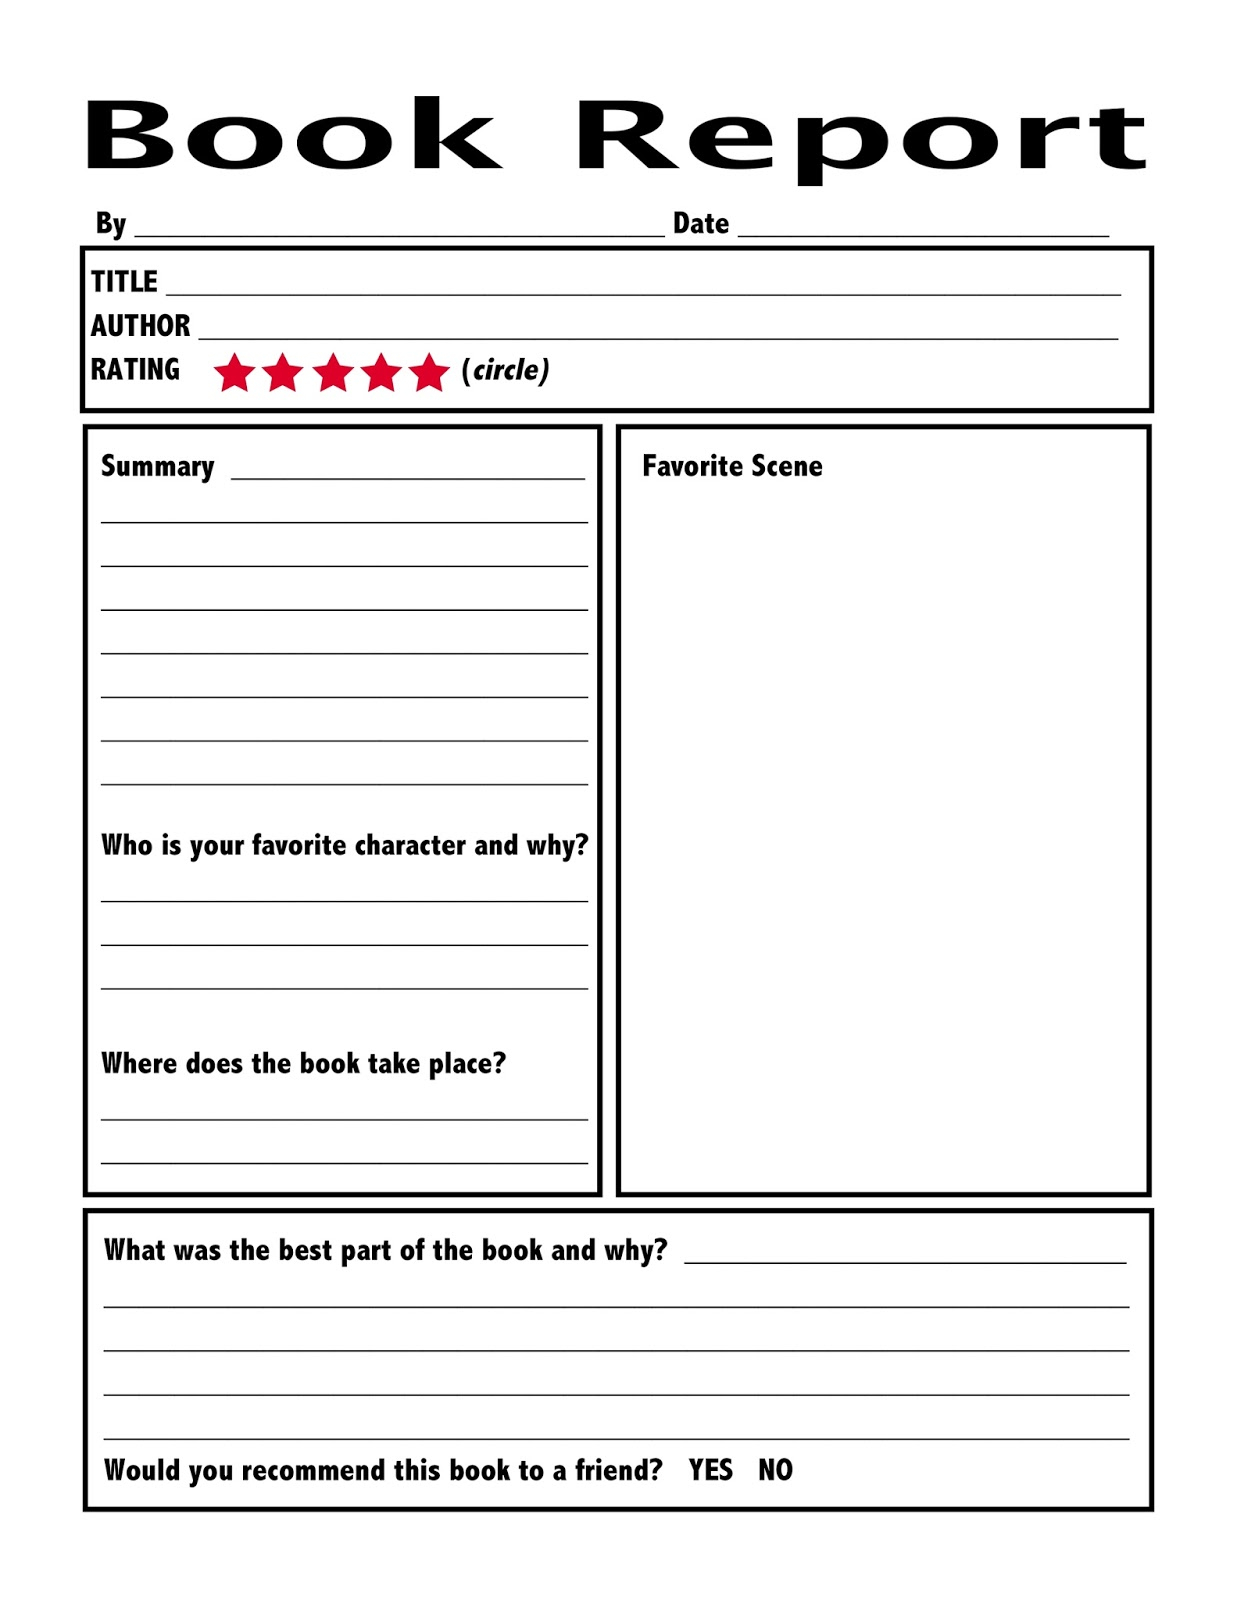 Book Report Writing For Students – Examples, Format, Pdf  Examples For Quick Book Reports Templates